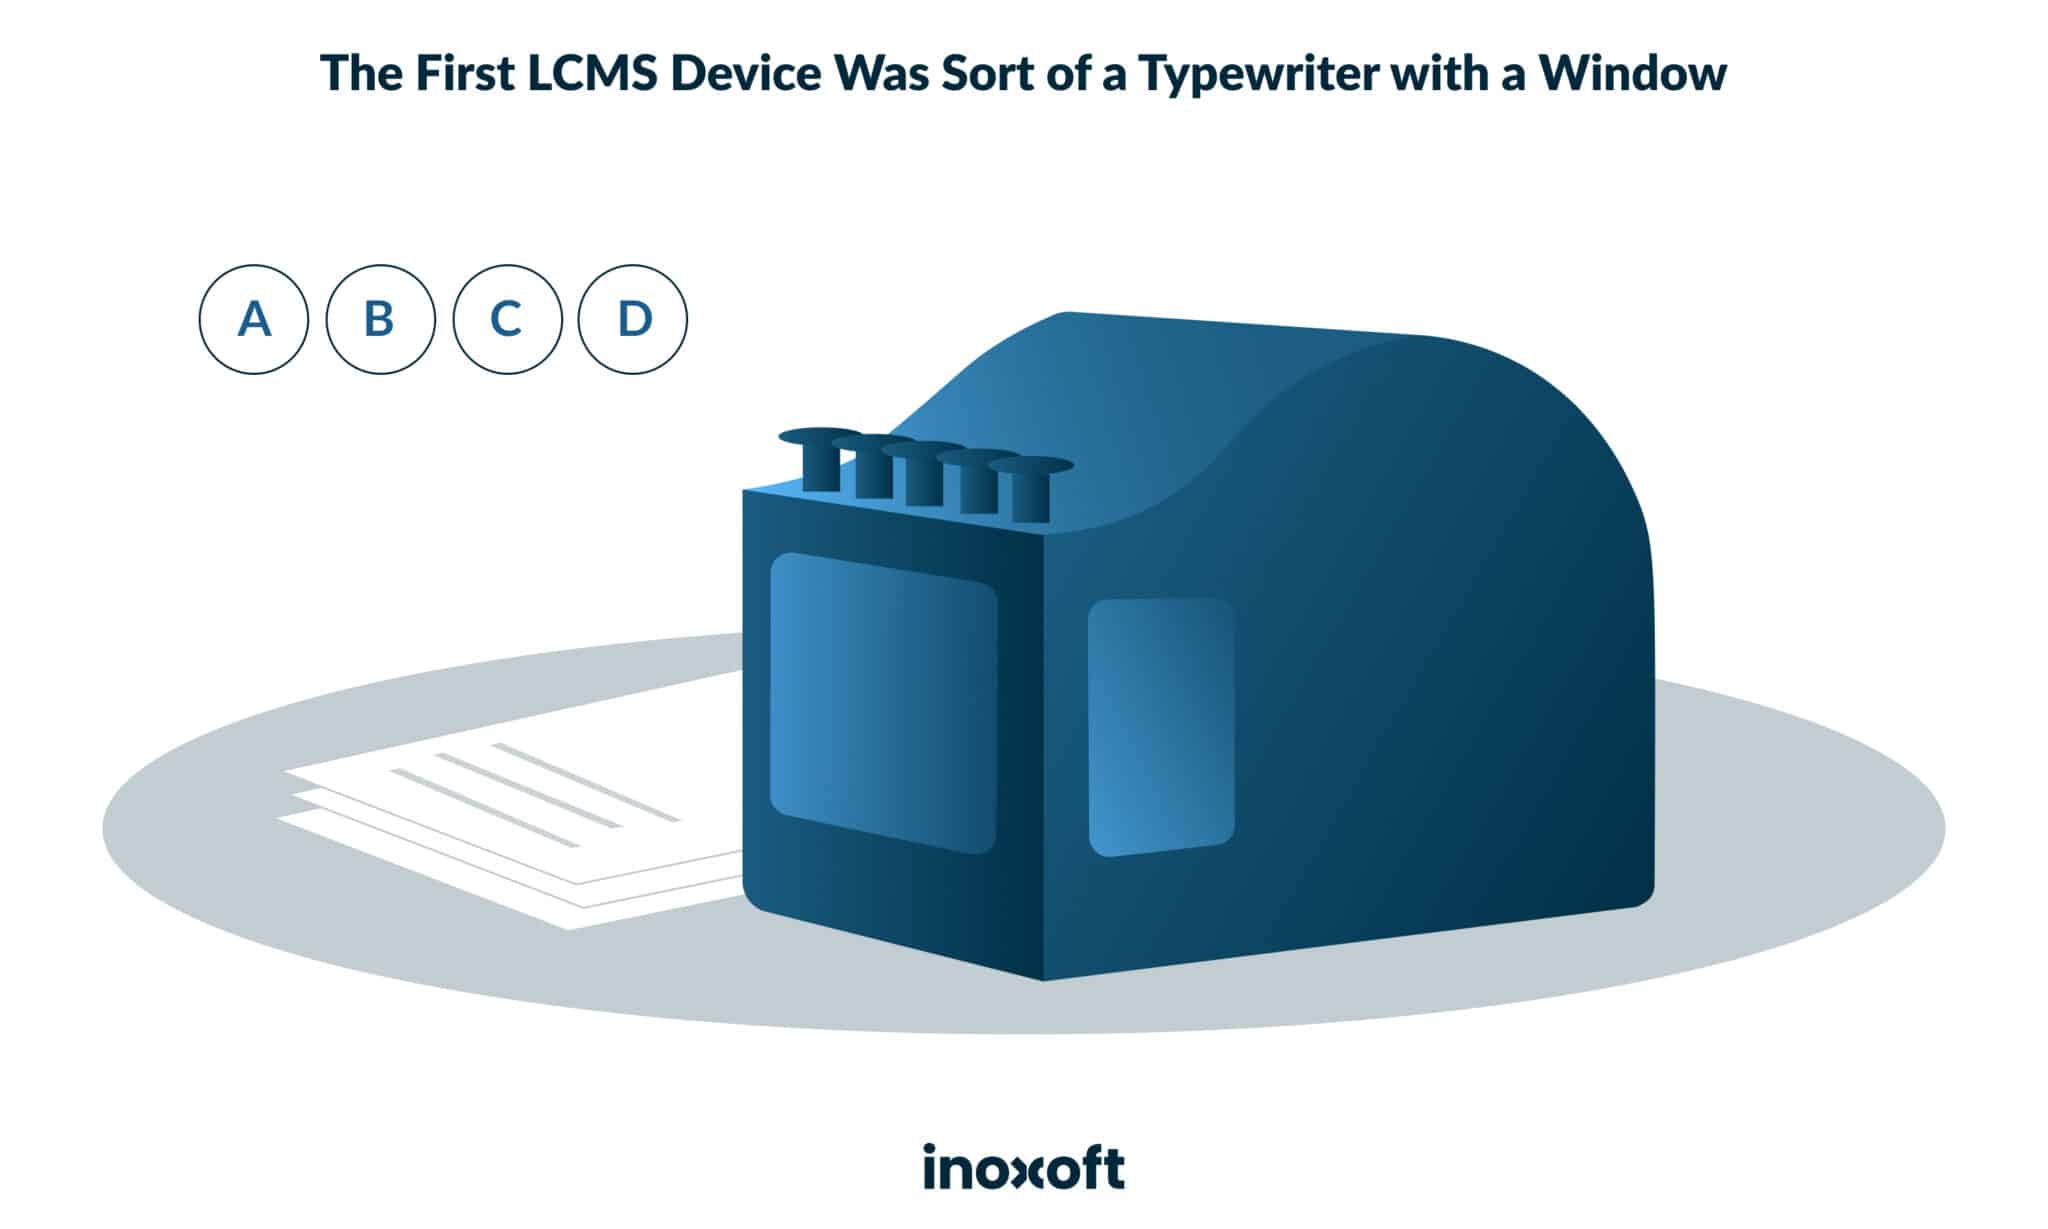 The first LCMS device was sort of a typewriter with a window.